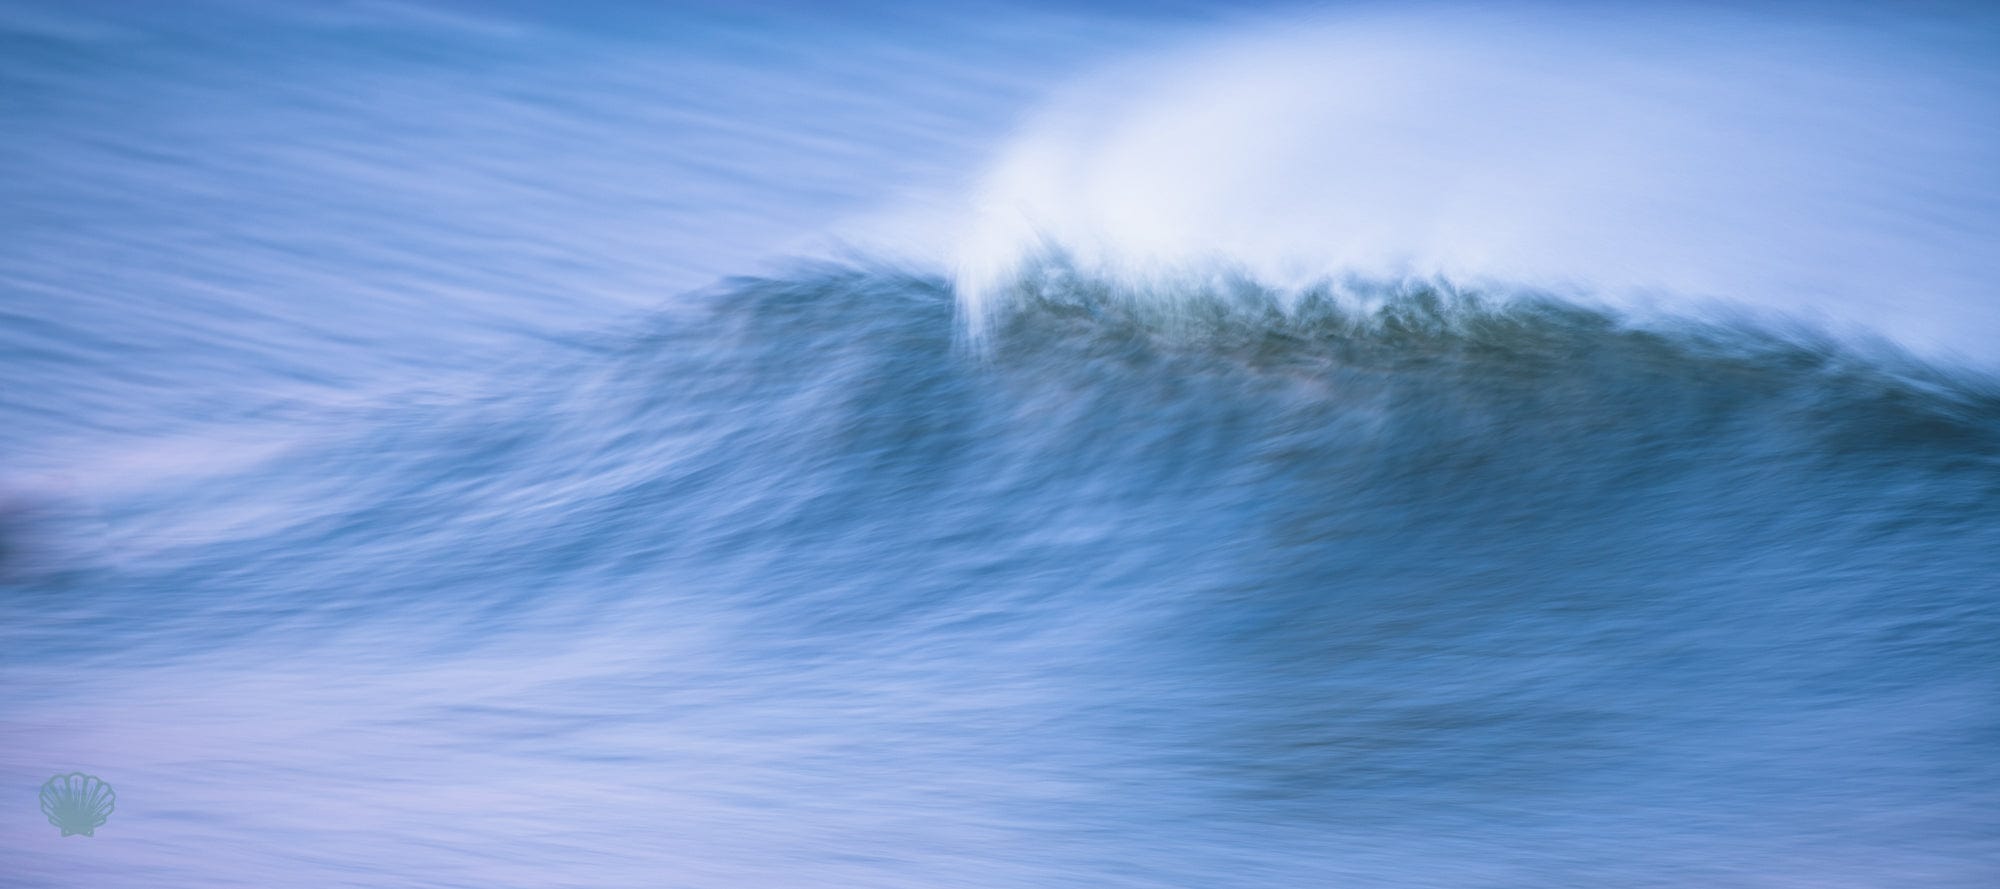 Cate Brown Photo Twilight in Motion  //  Seascape Photography Made to Order Ocean Fine Art